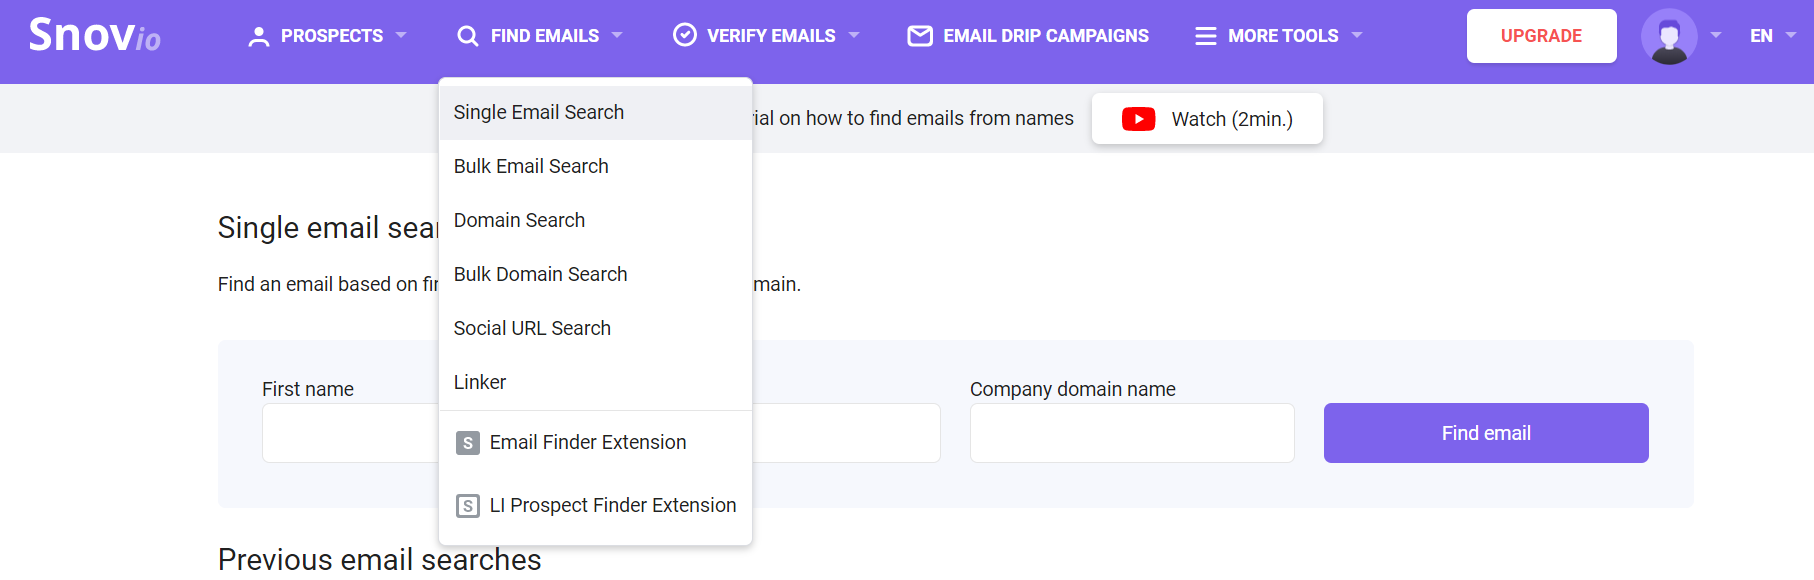 Snov.io single email search